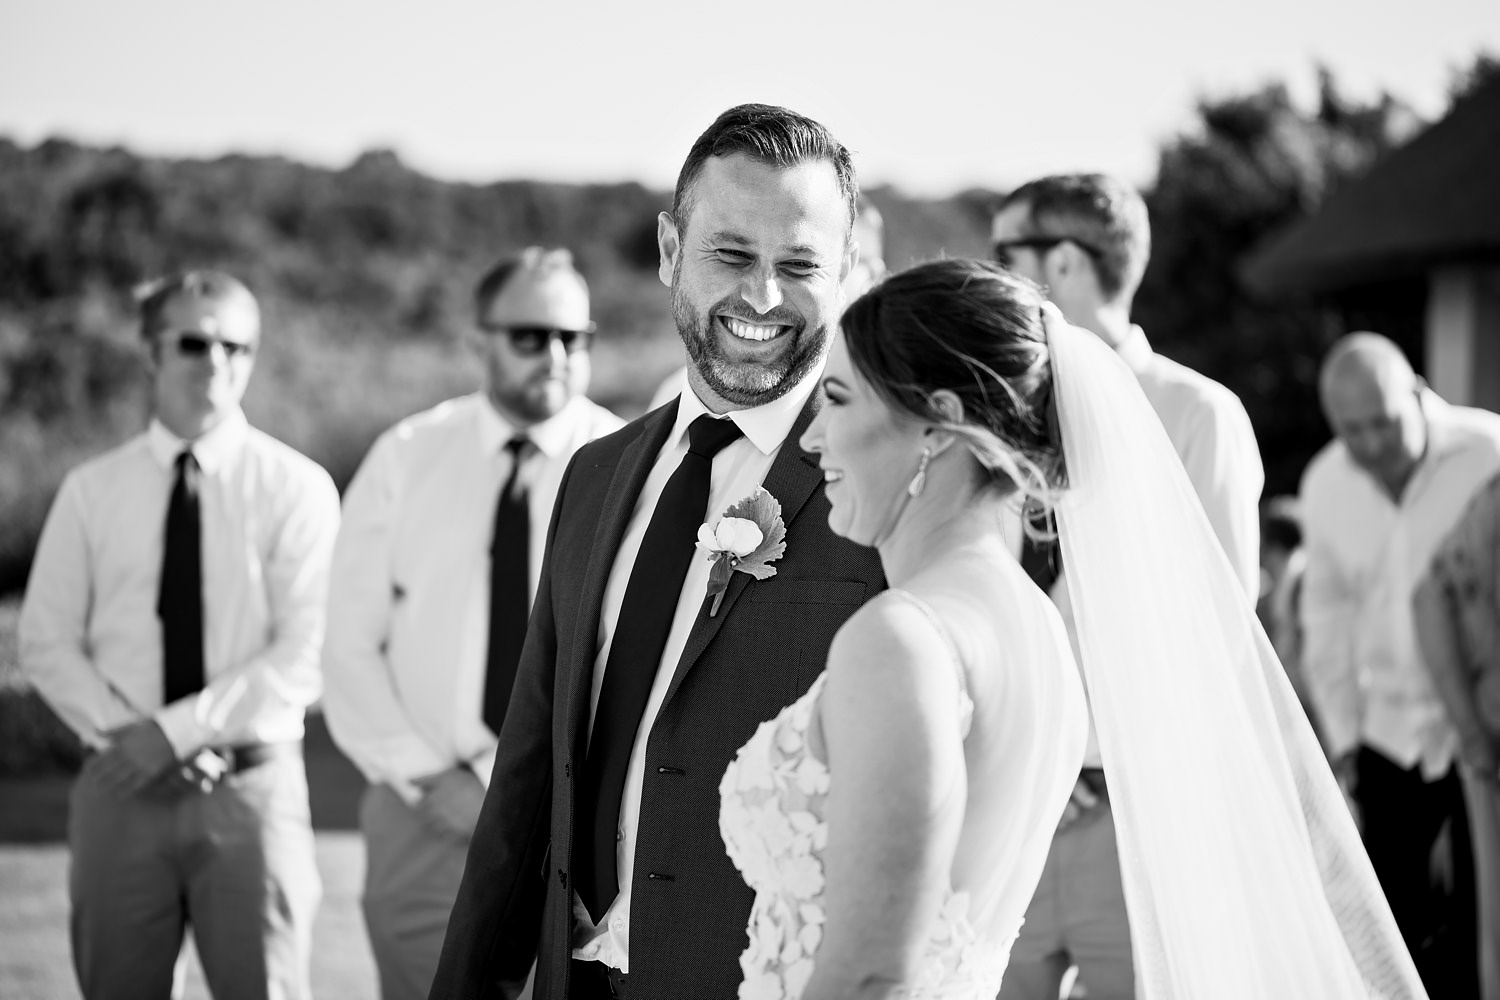 A black and white image of the groom smiling at his bride during their outdoor wedding ceremony